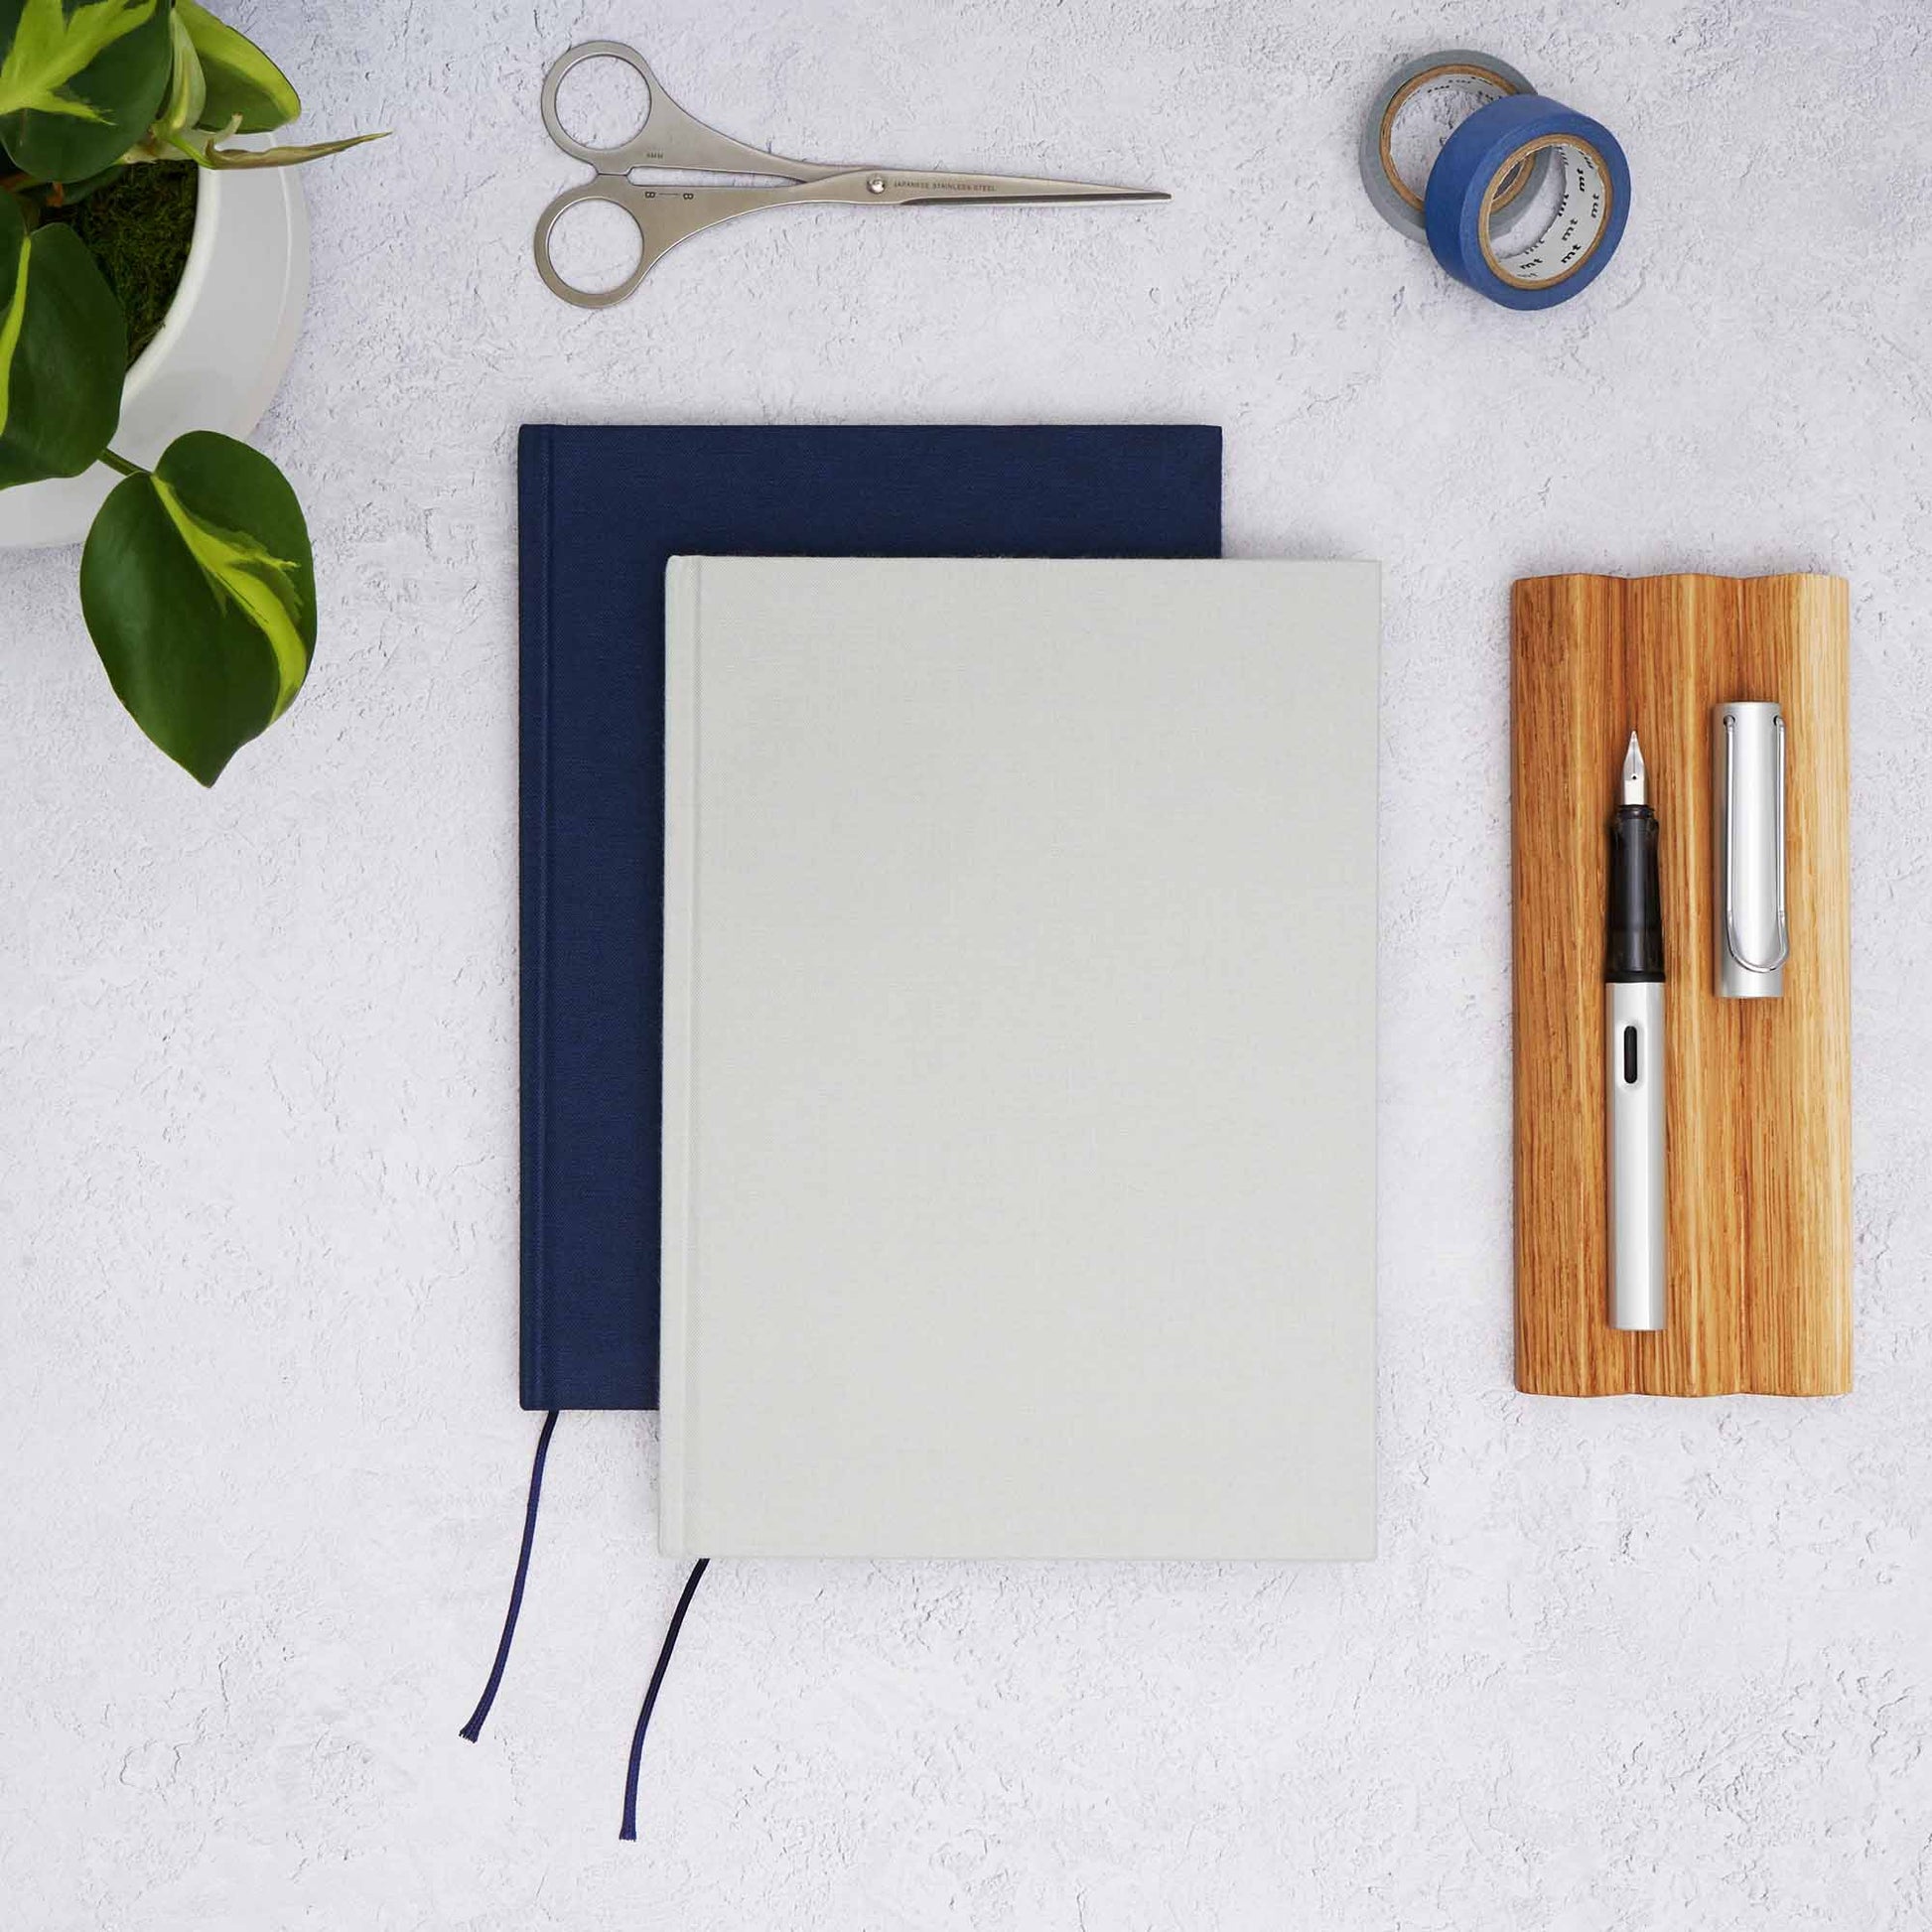 The Paper Mind Cosmo Air Light Hardcover Notebooks in grey and blue with an oak wood pen tray, Lamy AL Star fountain Pen, MT washi tape, Before Breakfast London scissors and plant. Fountain pen friendly notebooks from the paper mind